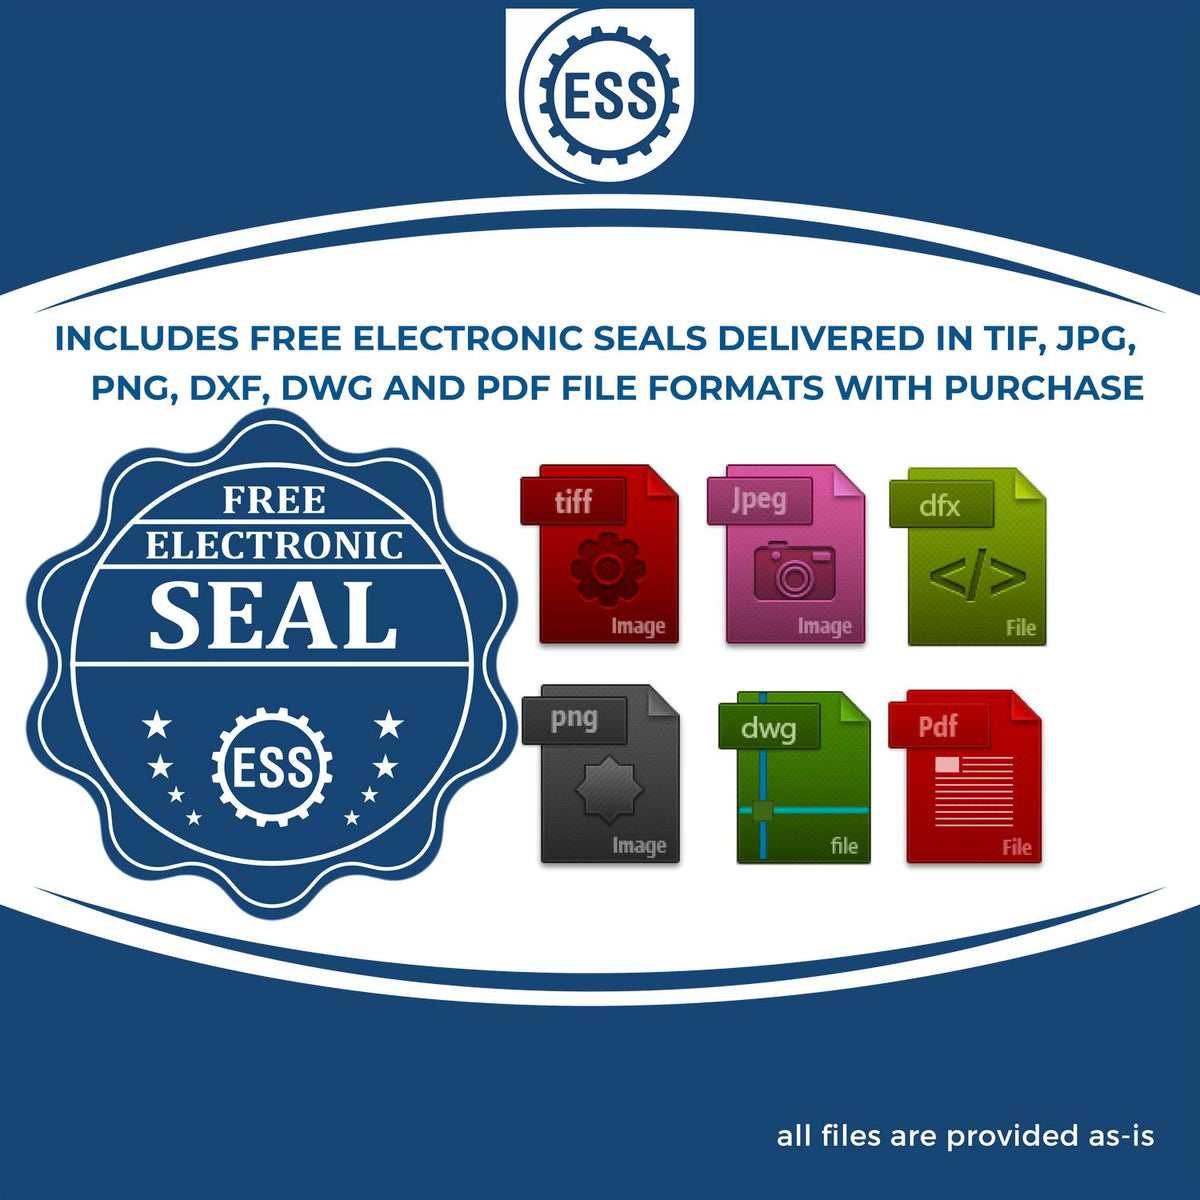 An infographic for the free electronic seal for the Delaware Engineer Desk Seal illustrating the different file type icons such as DXF, DWG, TIF, JPG and PNG.